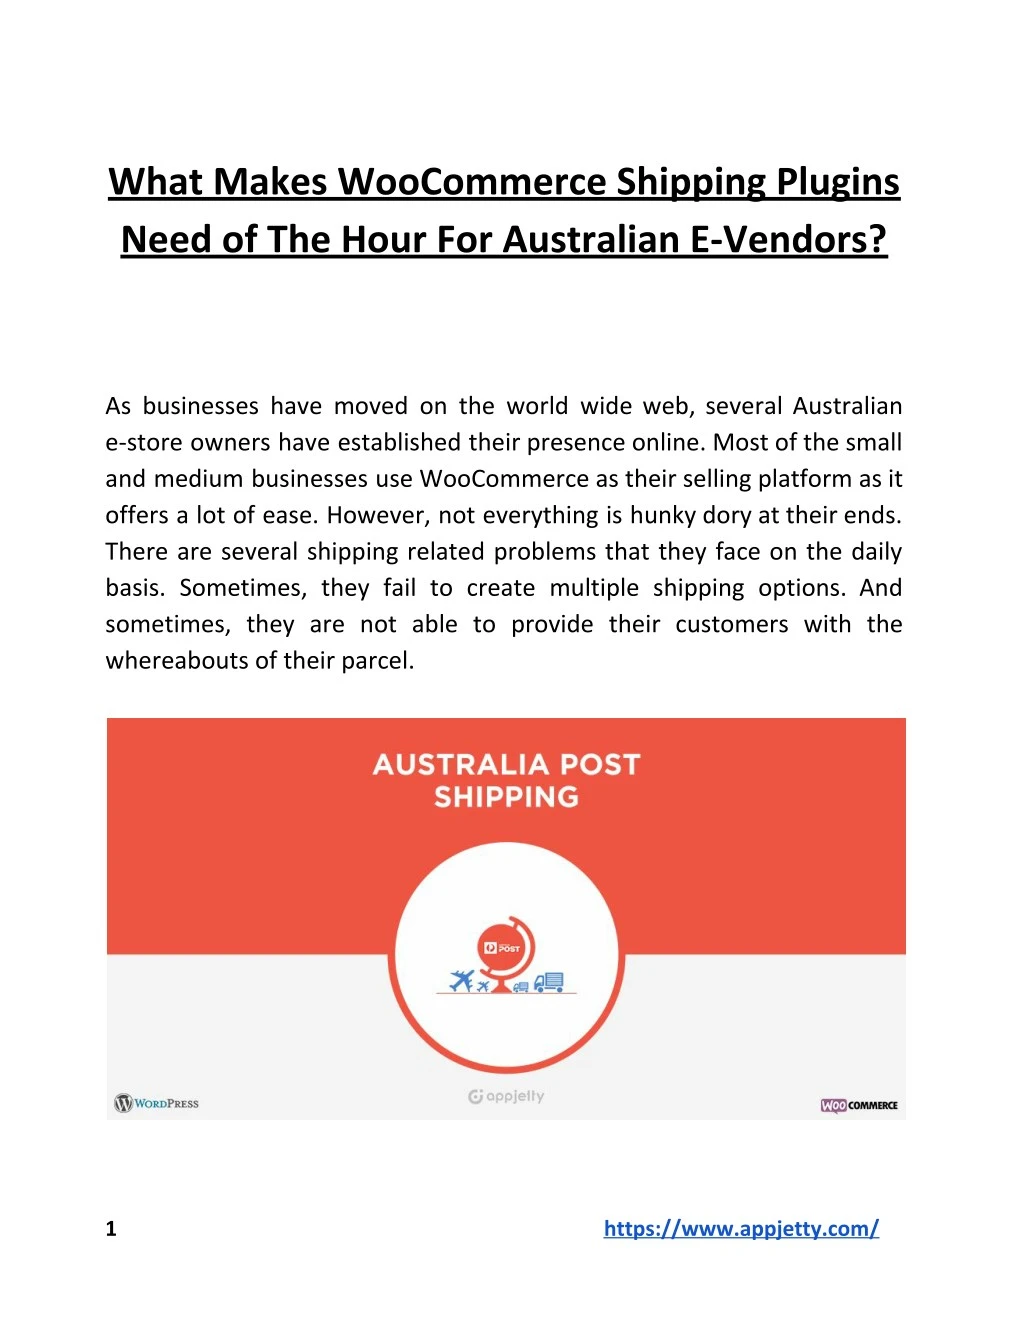 what makes woocommerce shipping plugins need